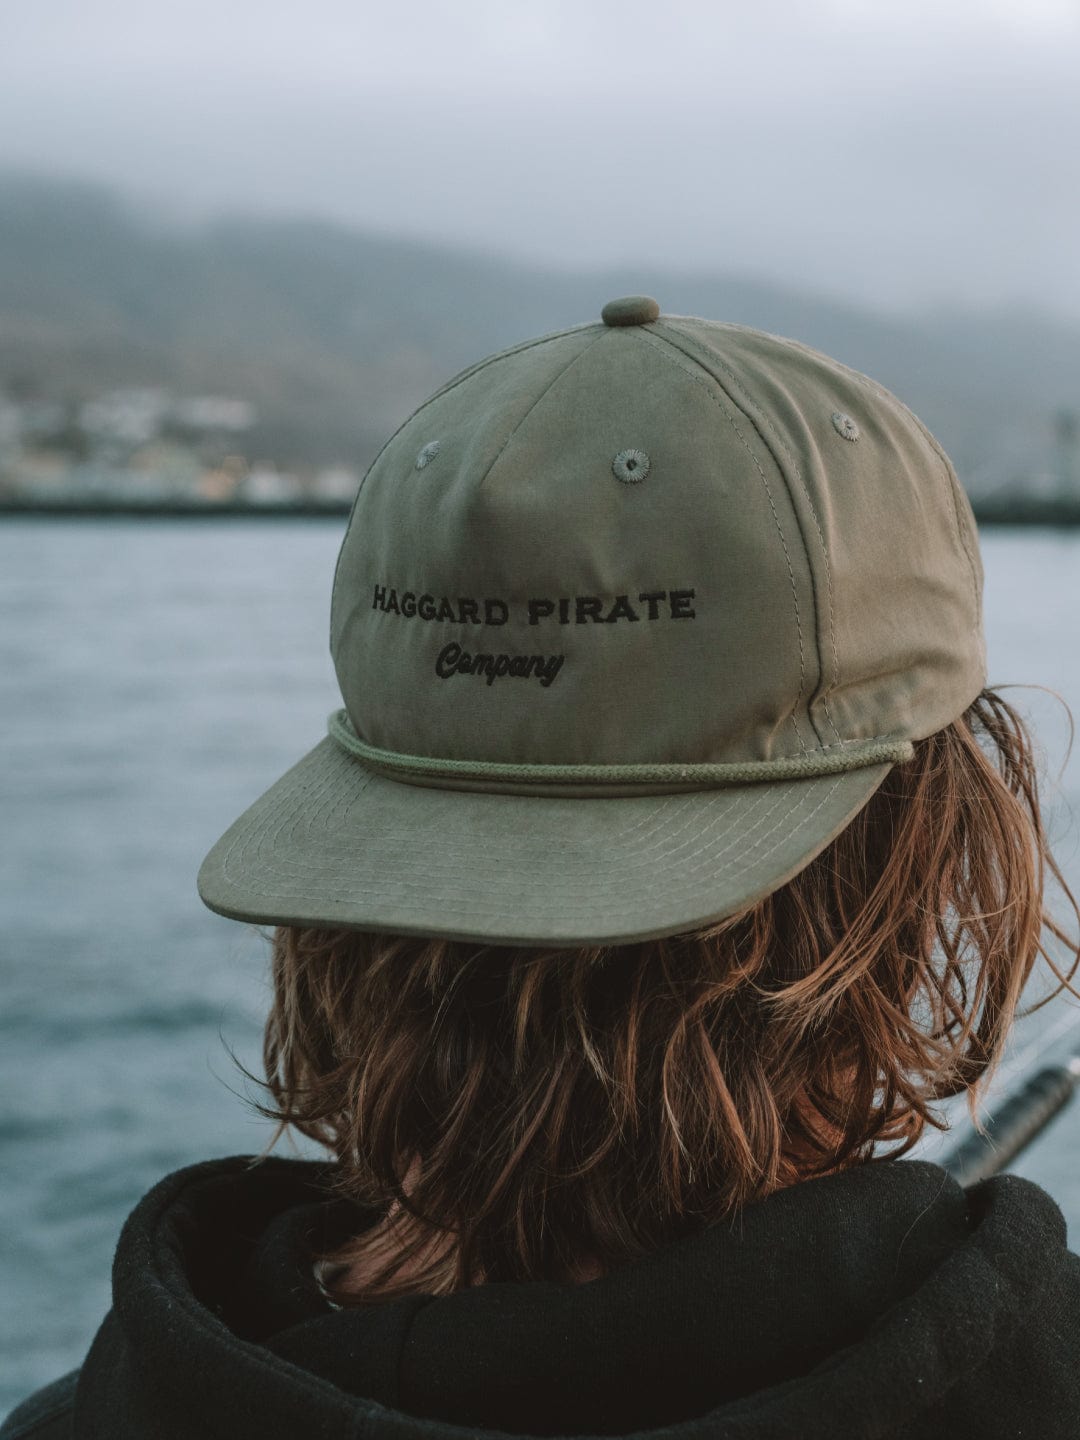 Haggard Pirate  Hats, Tees, Rods, Accessories